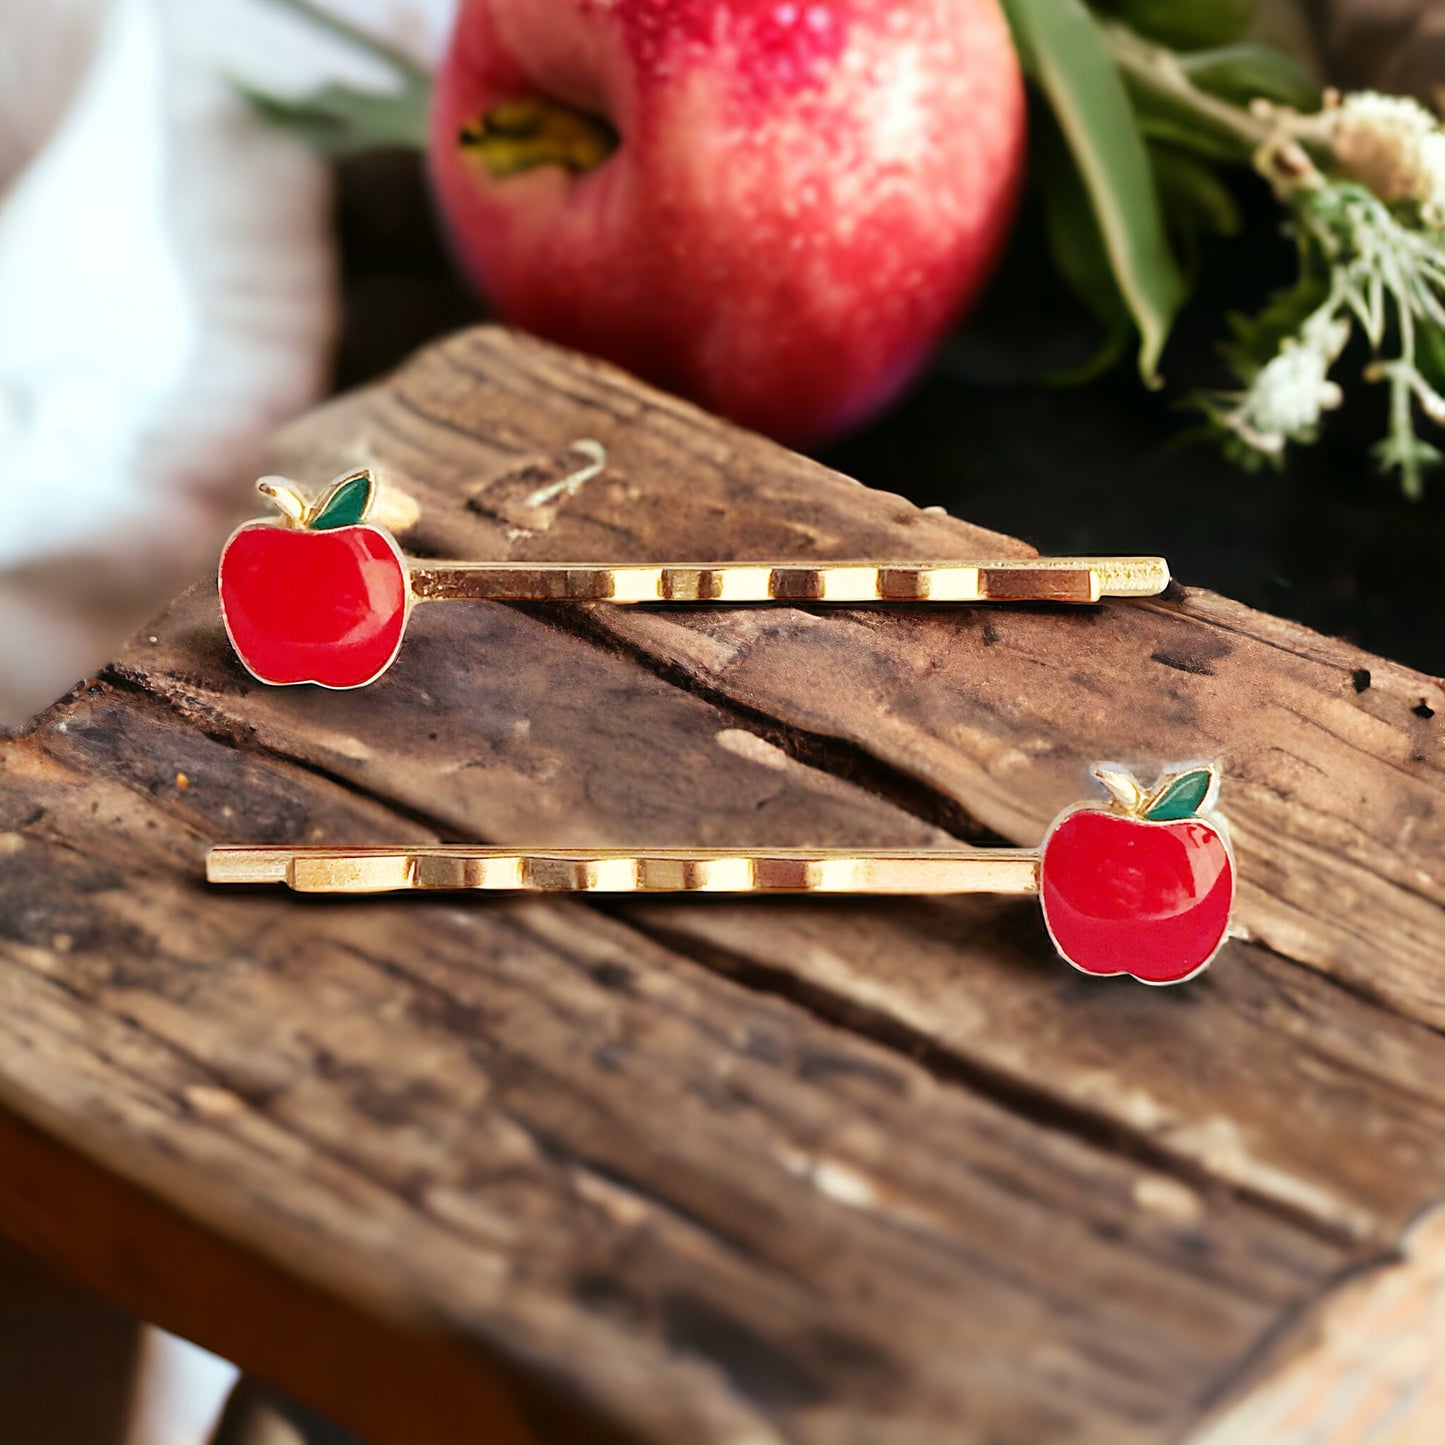 Red Apple Fruit Enamel Bobby Pins - Fun & Whimsical Hair Accessories